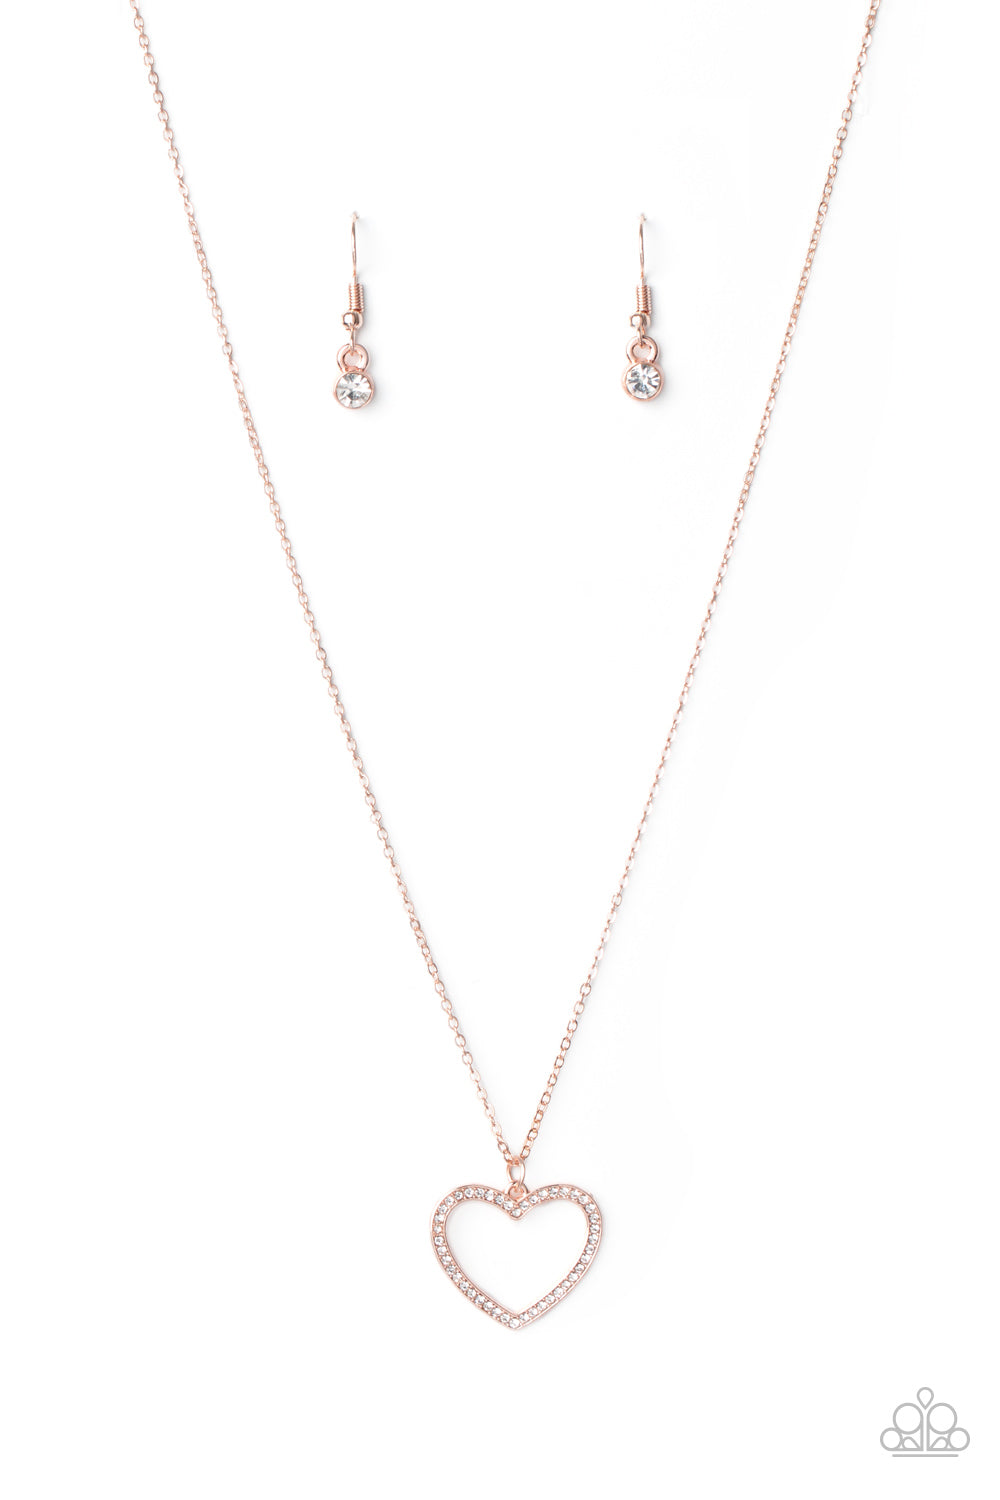 GLOW By Heart - rose gold - Paparazzi necklace